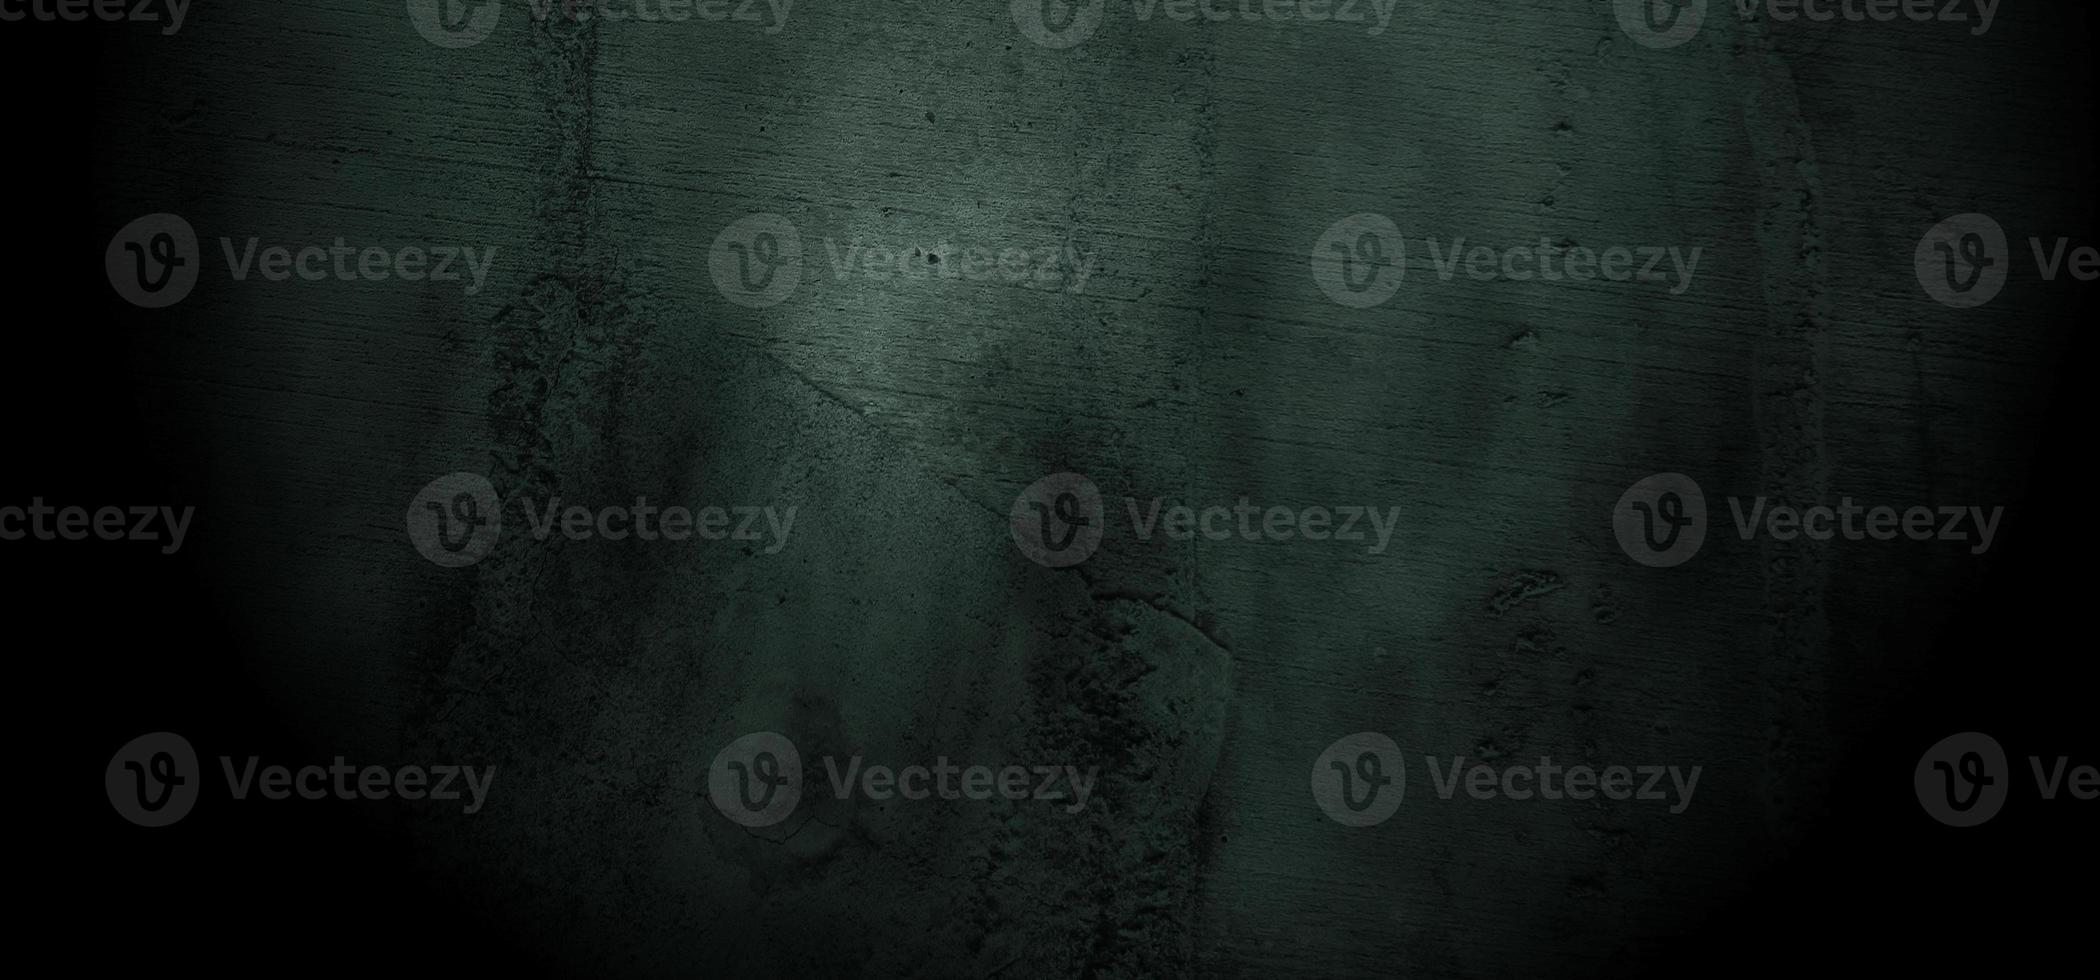 Background of scary wall texture. Grunge empty with dark smoke shaddow photo